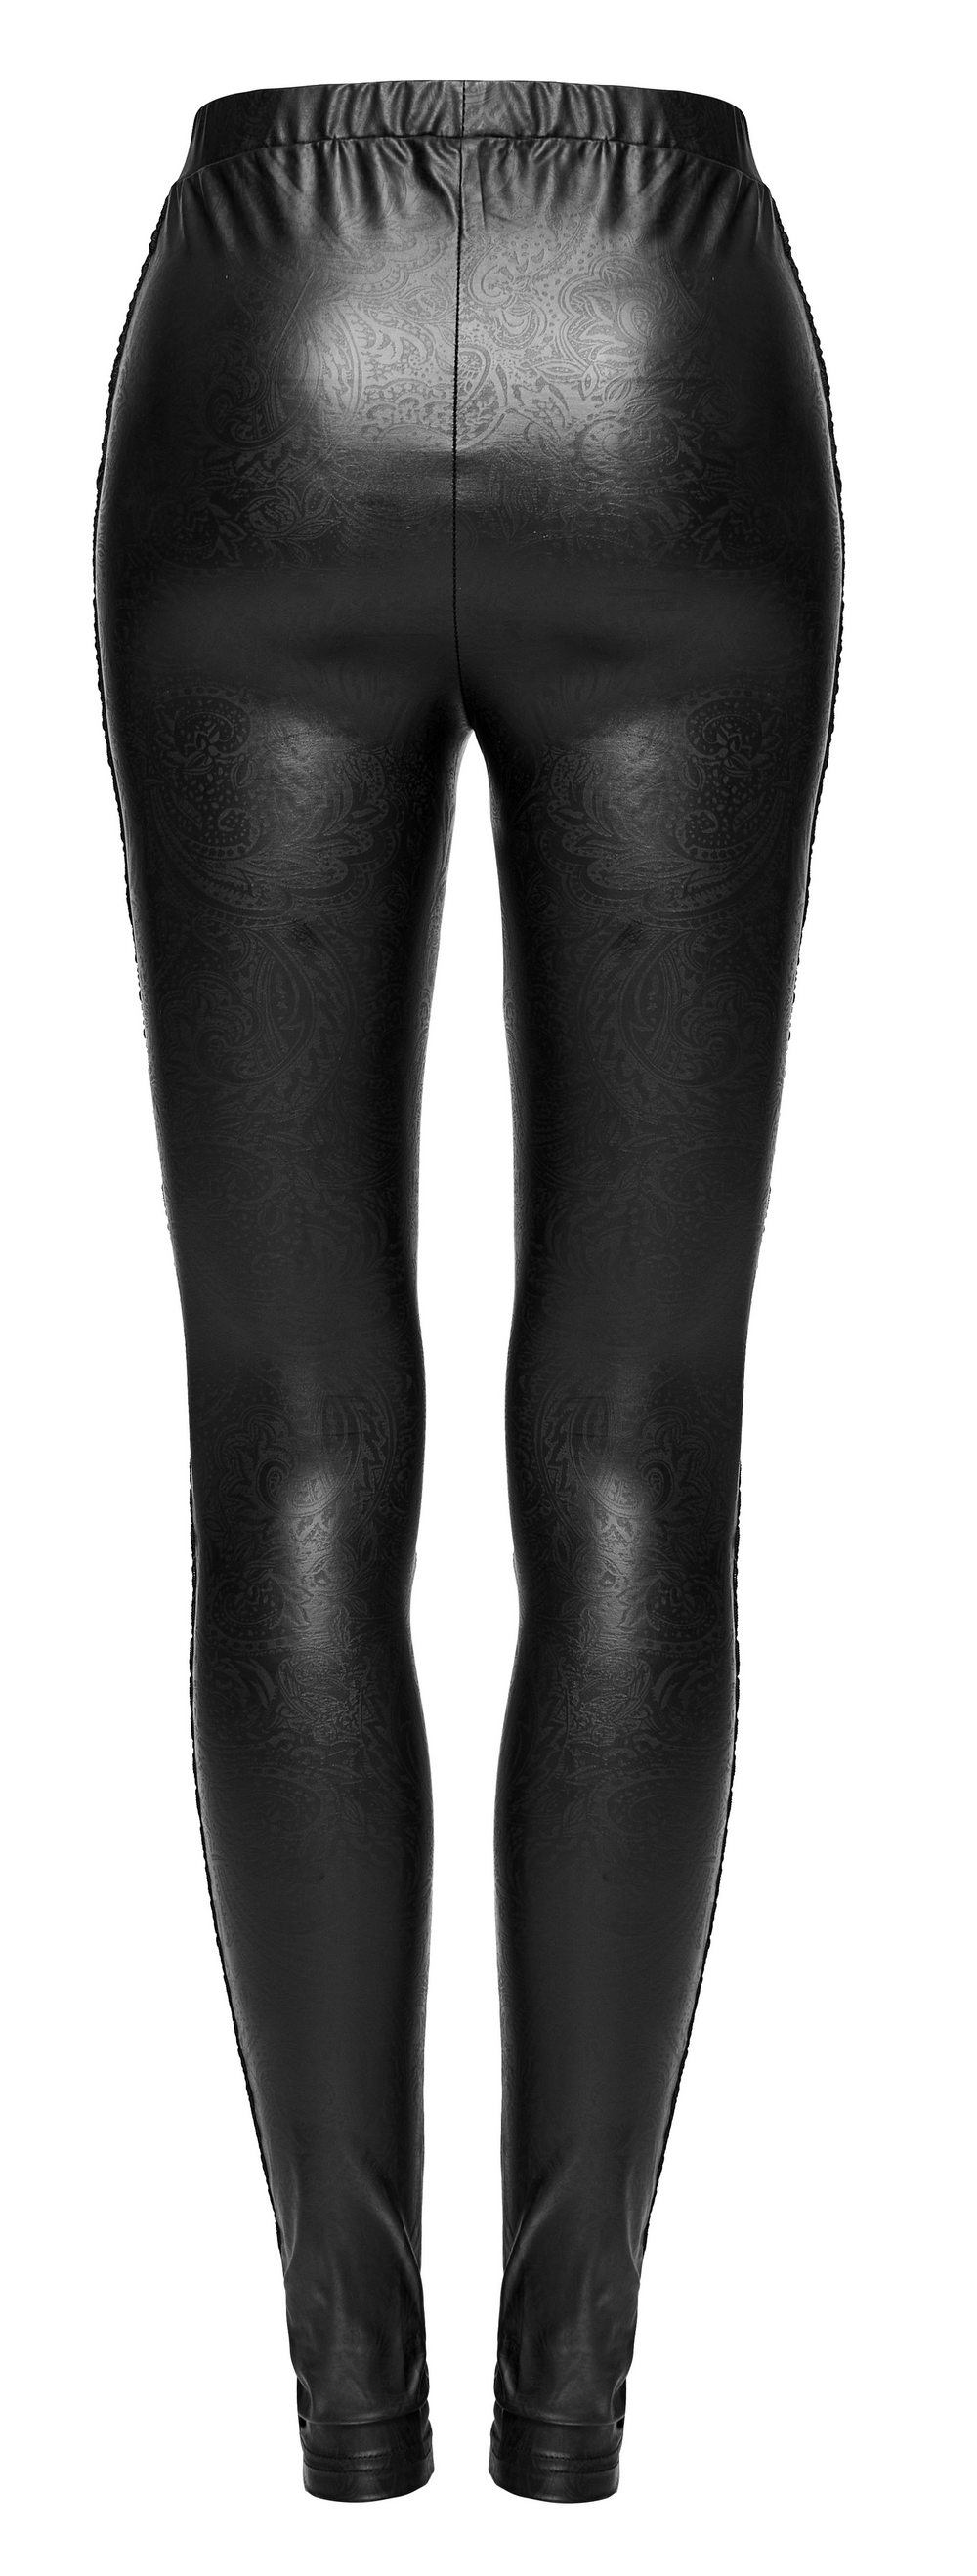 Chic Women's Flocking Bind Lace Leggings with Lace-Up